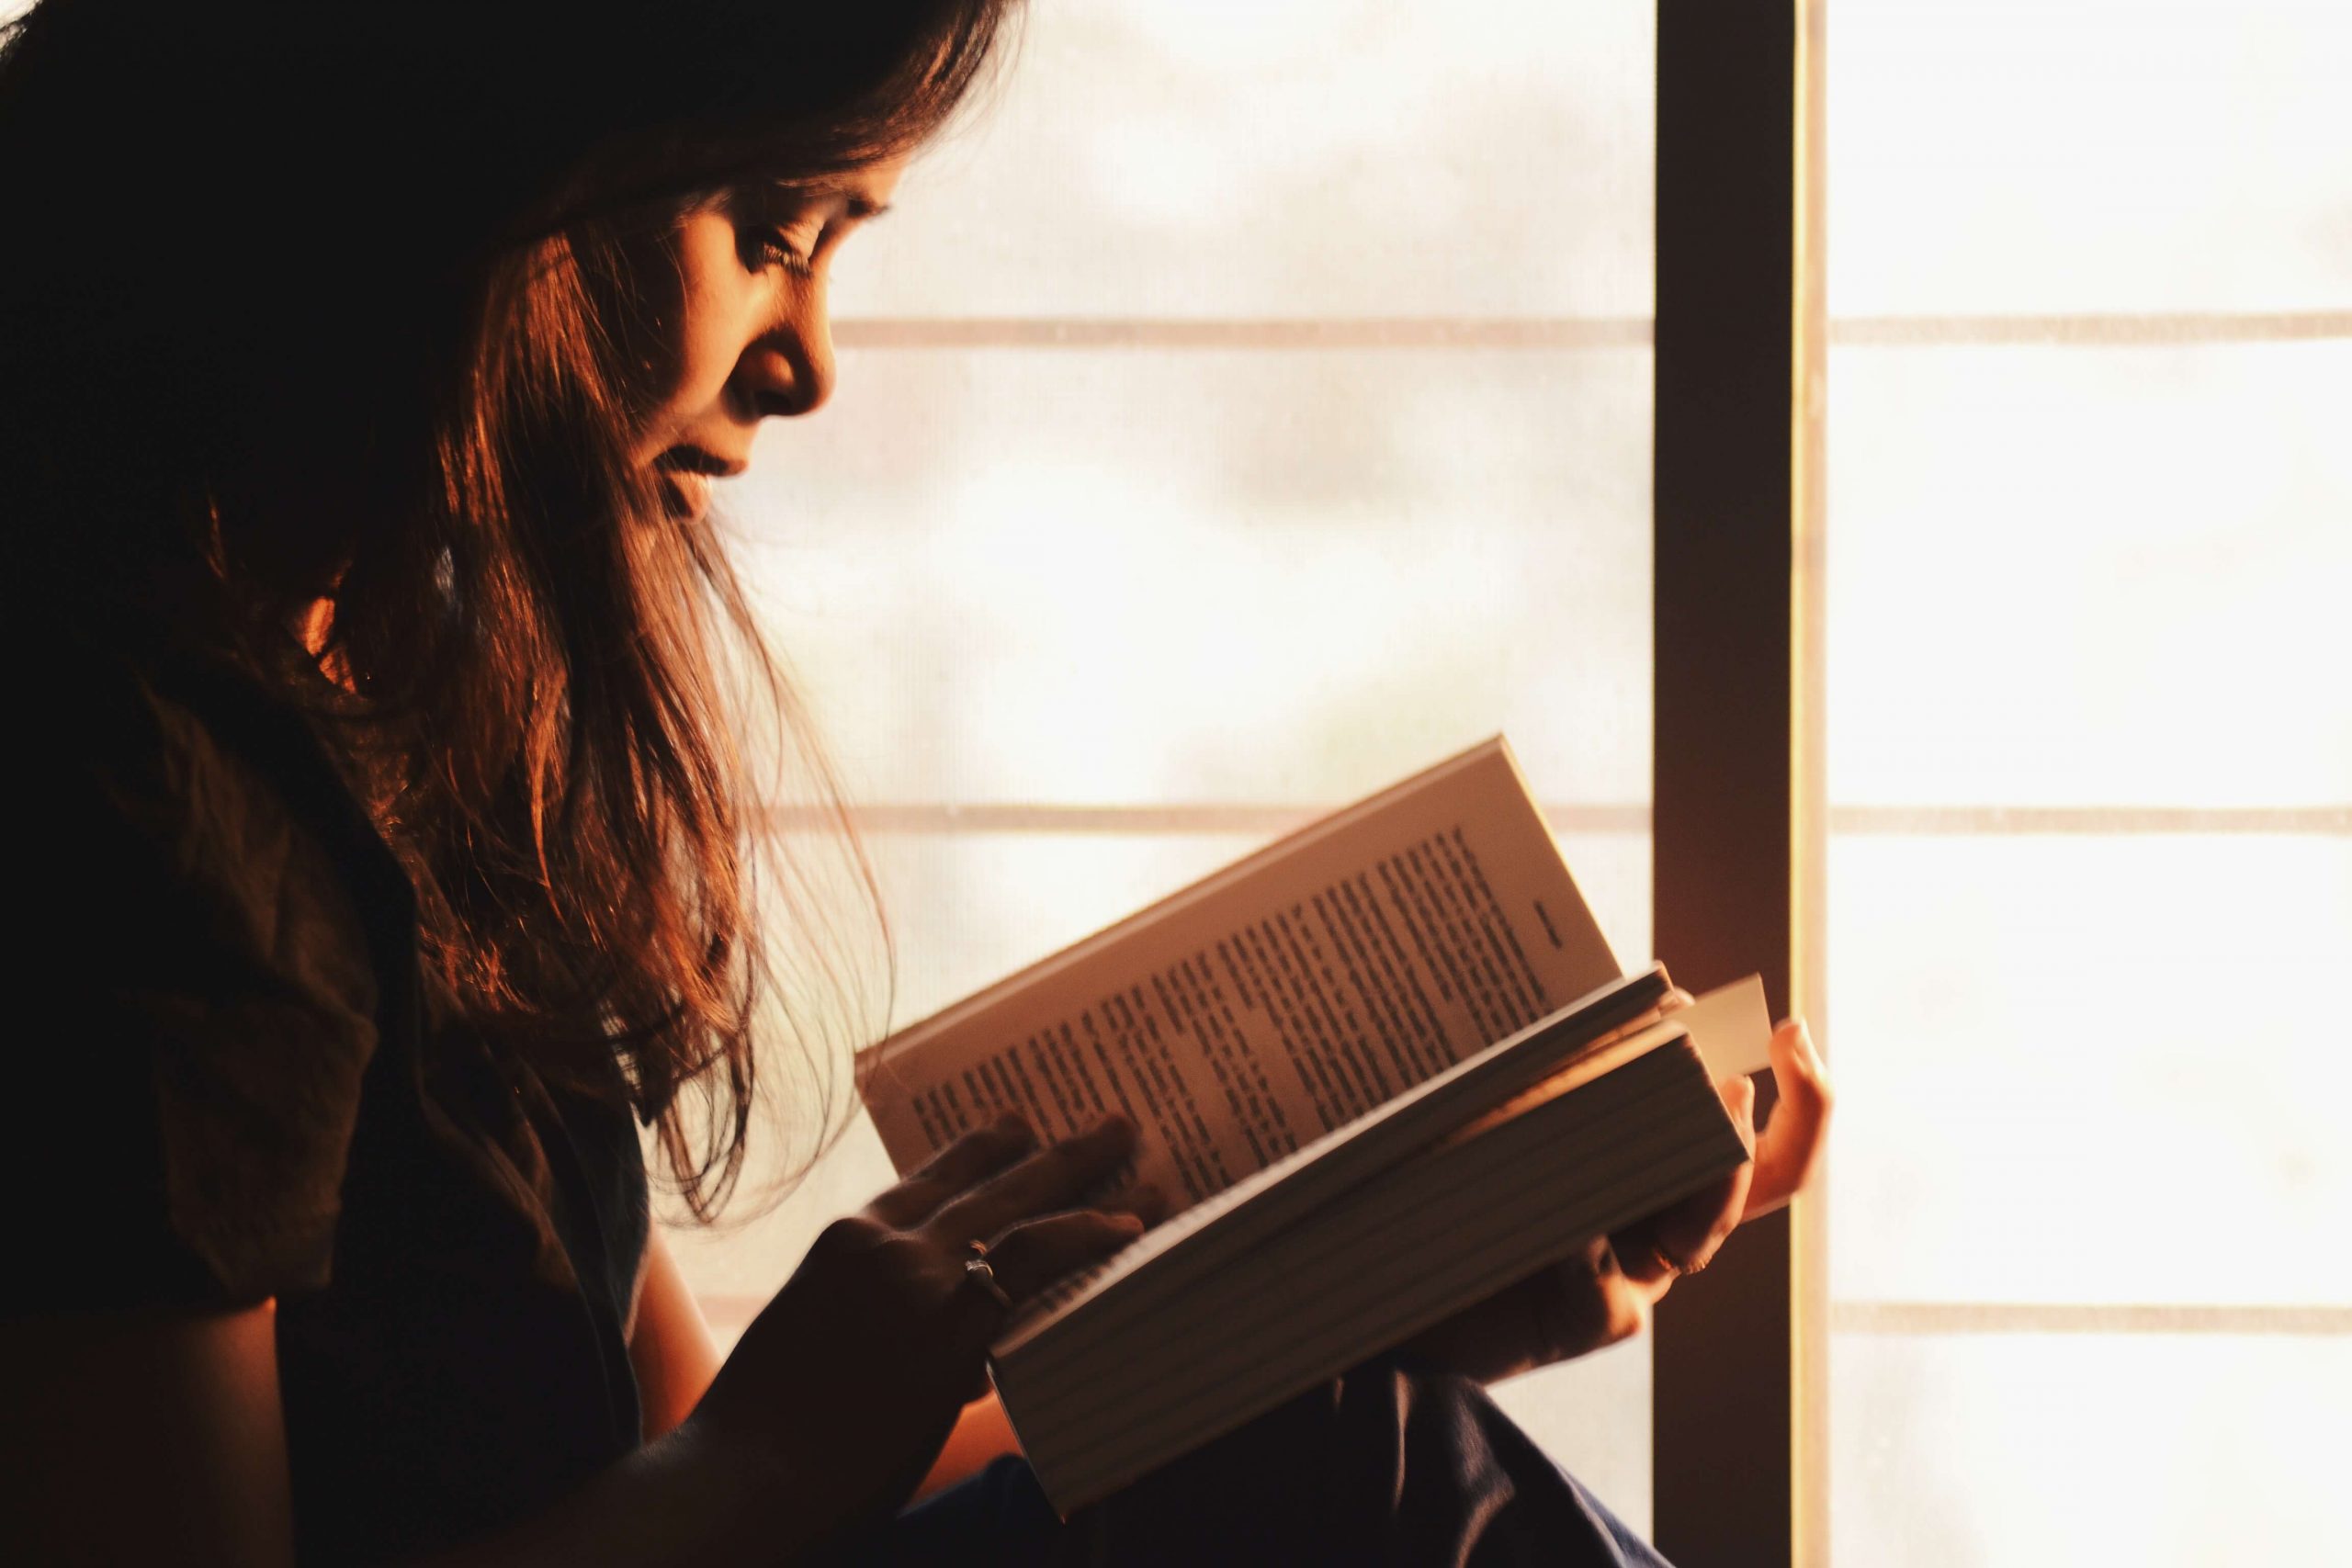 Image of a woman reading a book in soft lighting